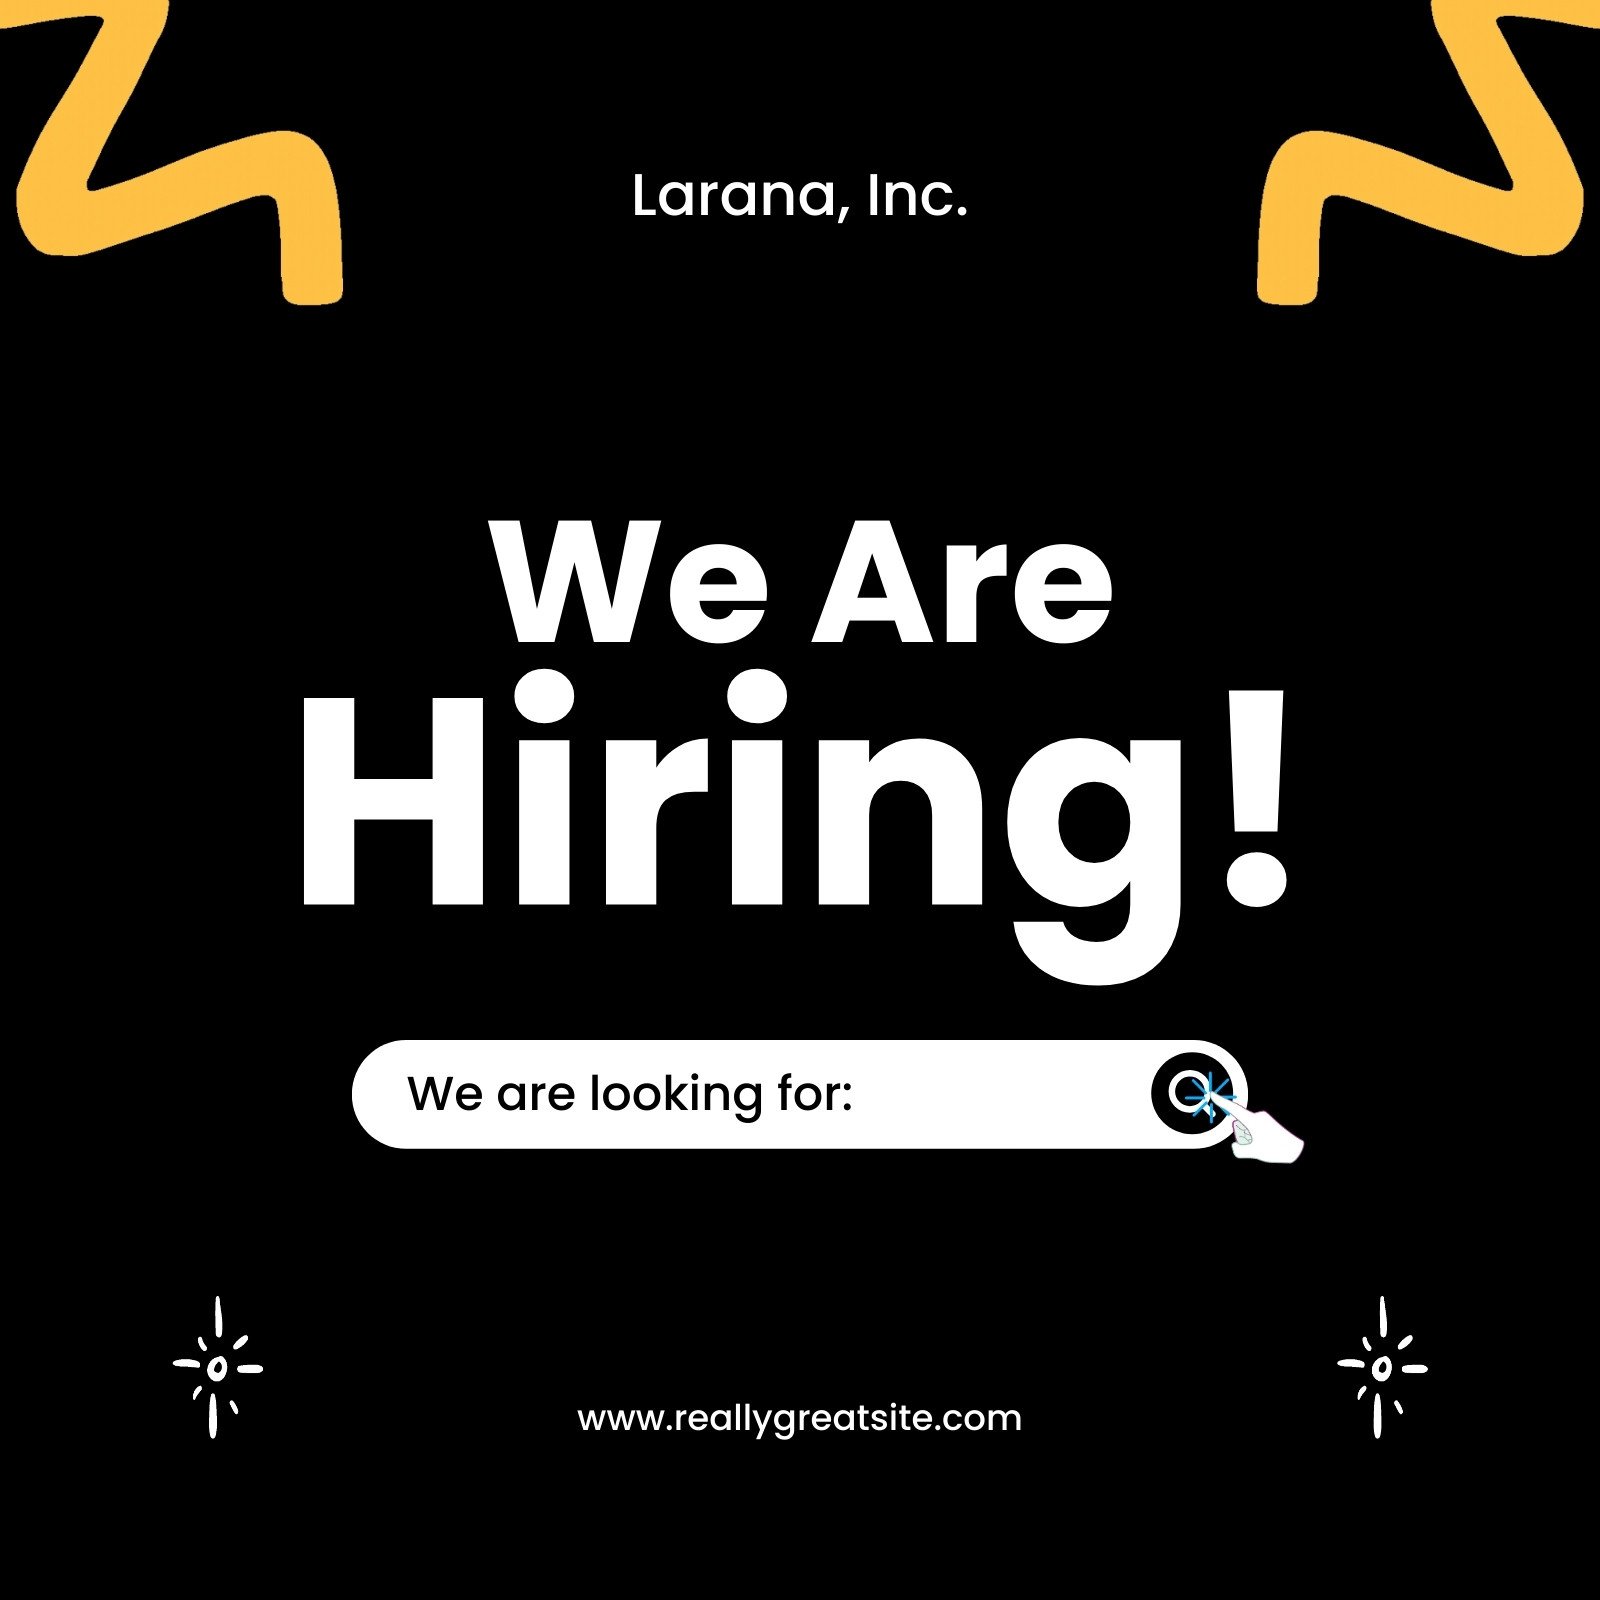 We Are Hiring Vector Hd PNG Images, We Are Hiring Png Backgroun Design, We  Are Hiring Png Images, We Are Hiring Vector, Were Hiring Png PNG Image For  Free Downl… | We